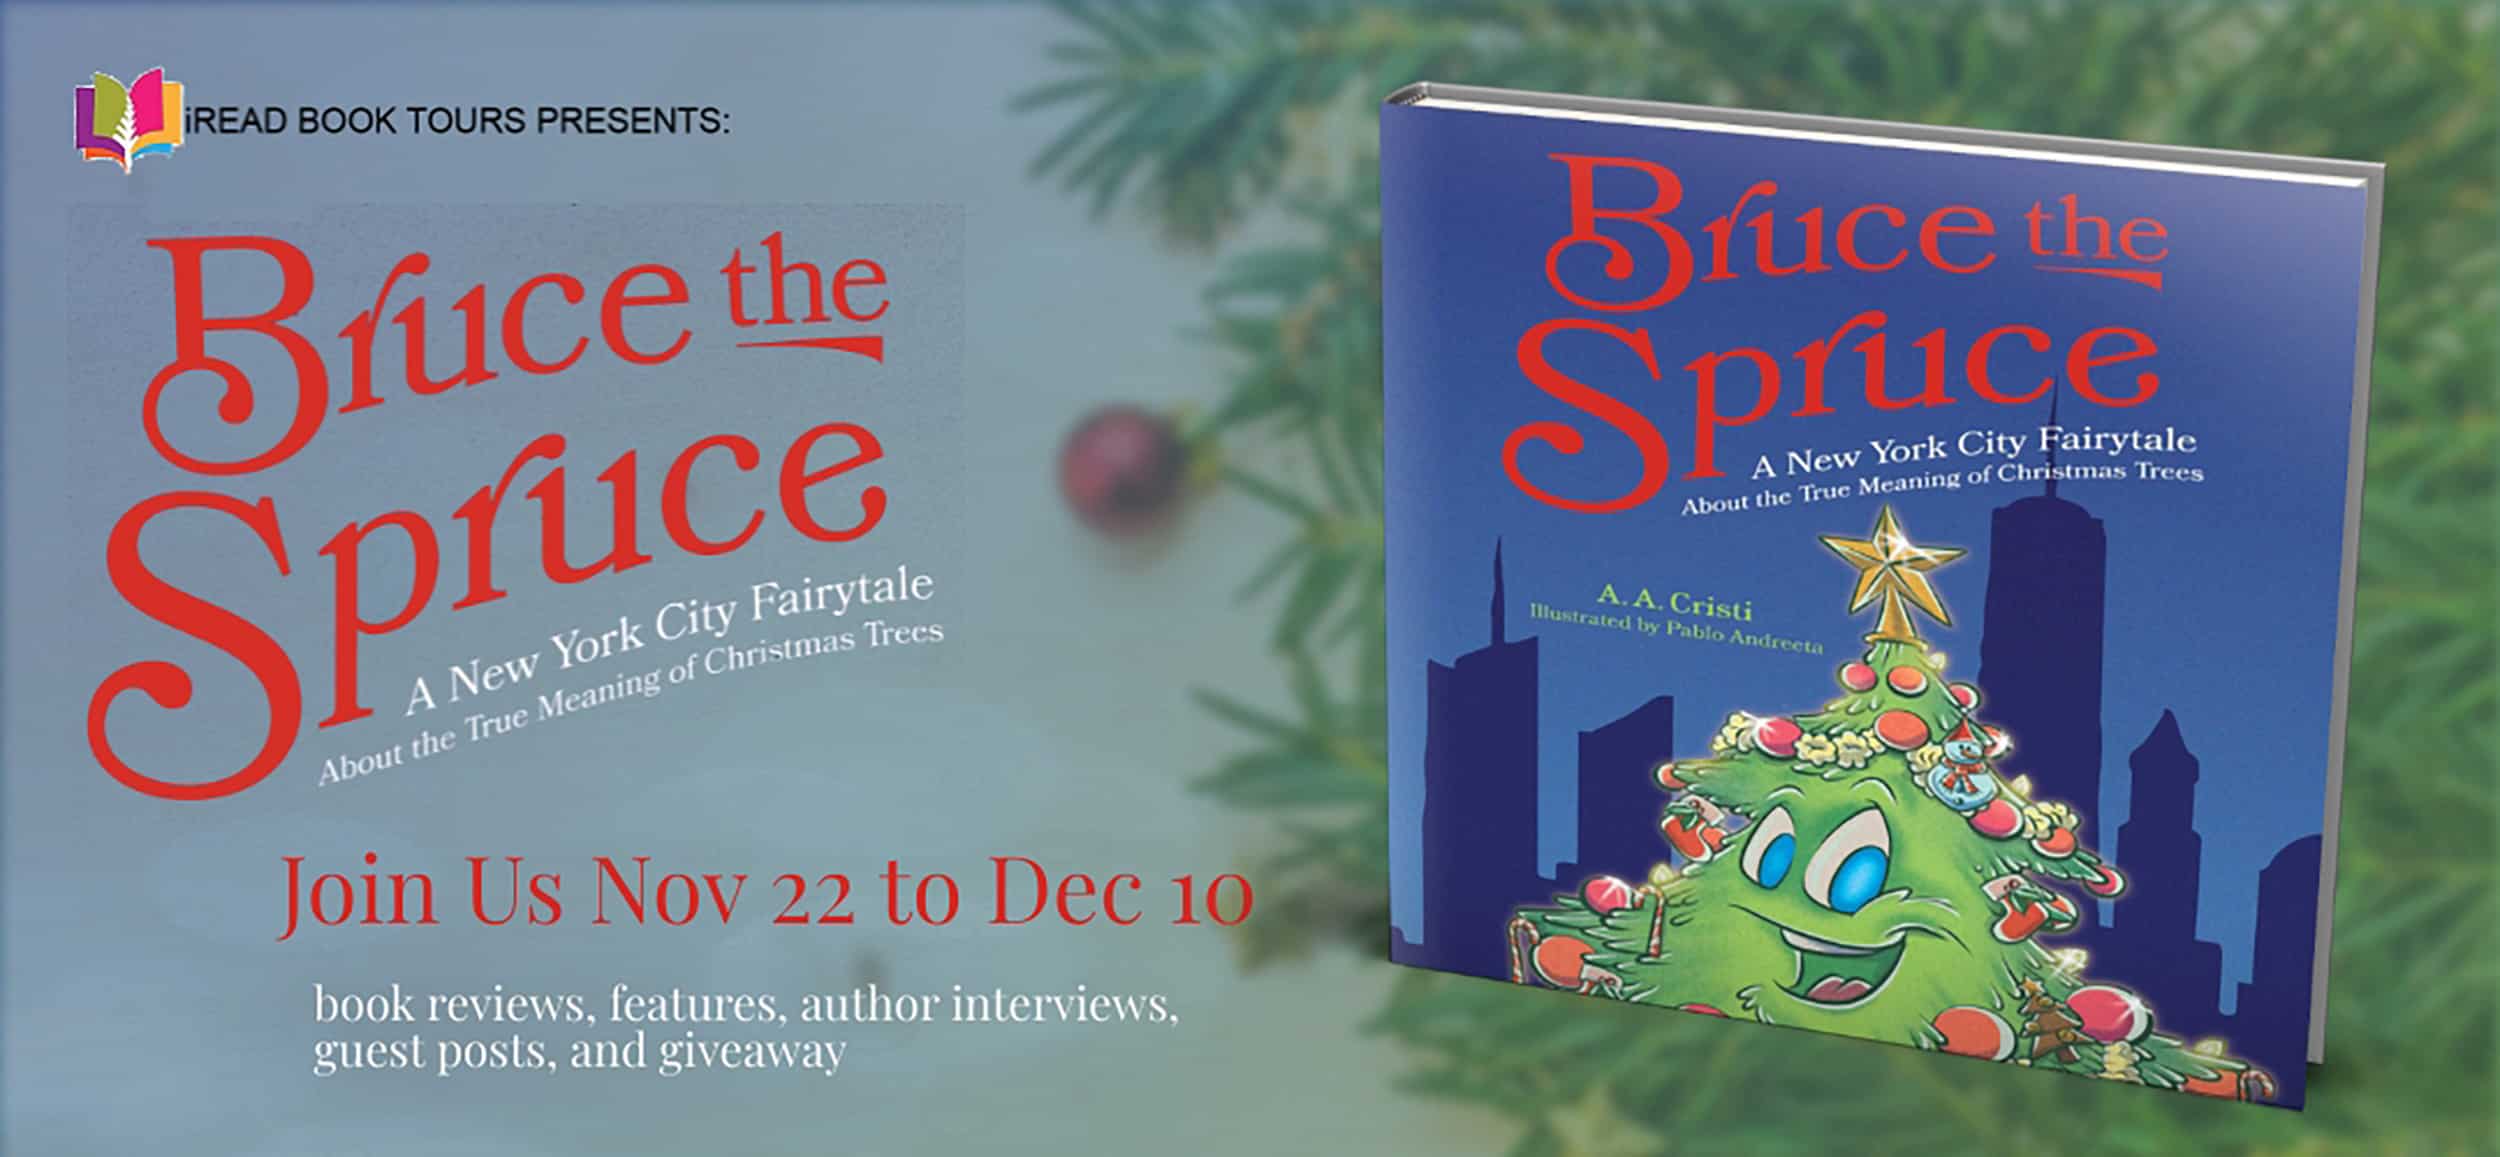 Bruce the Spruce: A New York City Fairytale by A.A. Cristi | Review, Giveaway, Author Interview